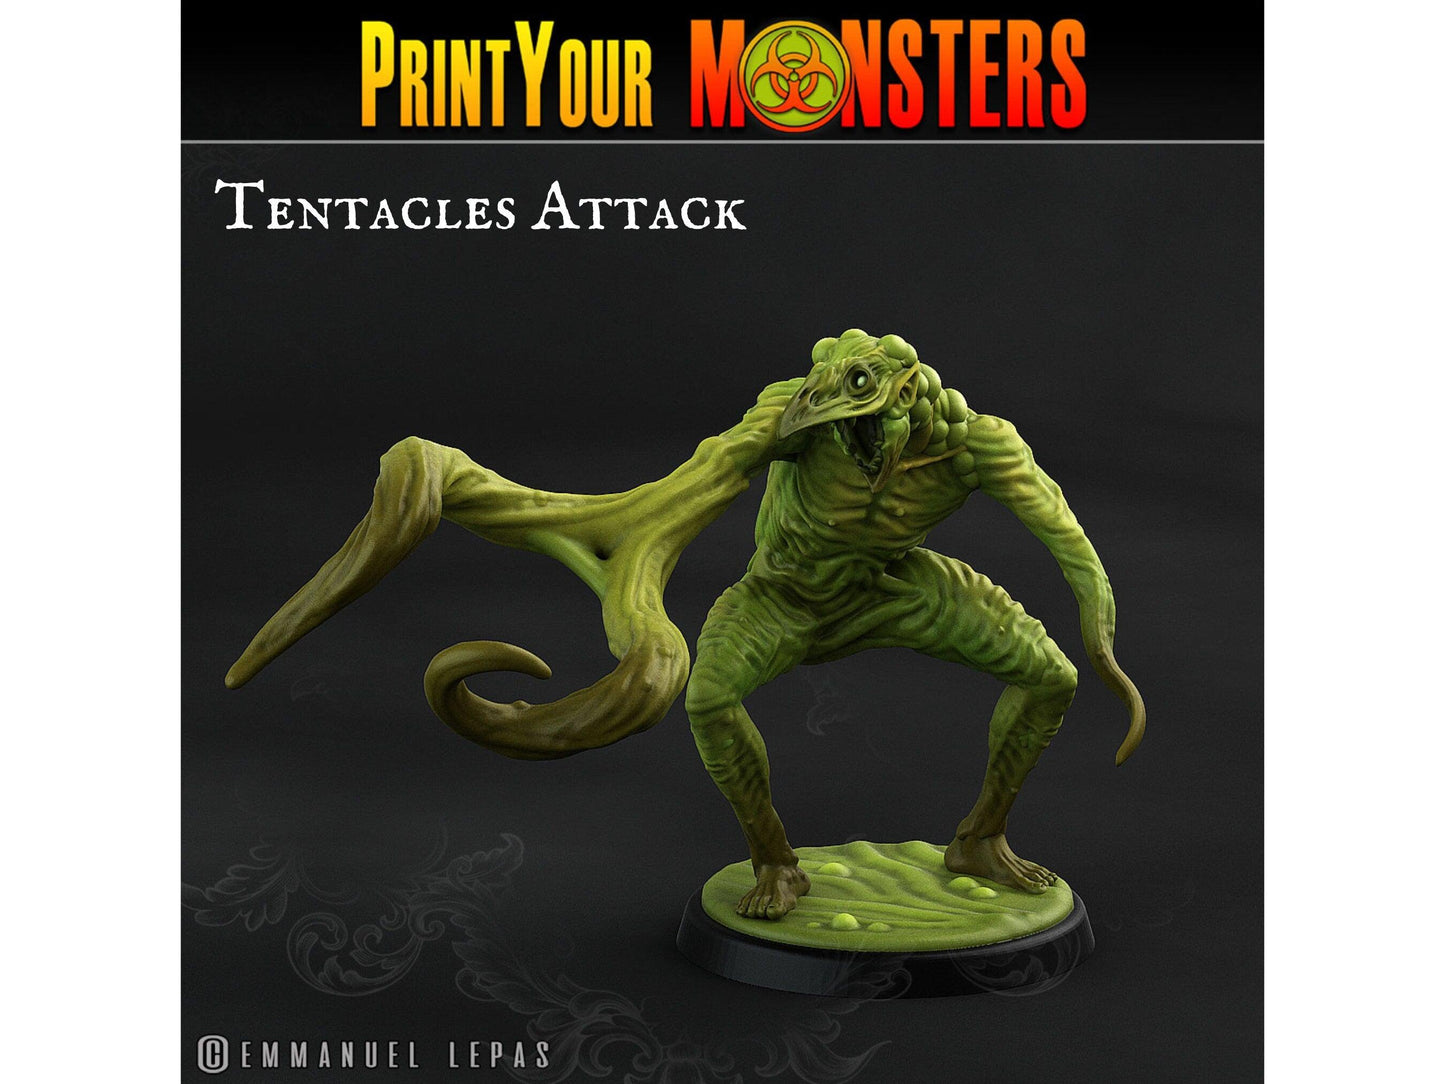 Attack Plagueman Miniature | Print Your Monsters | Tabletop gaming | DnD Miniature | Dungeons and Dragons, dnd 5e plague miniature - Plague Miniatures shop for DnD Miniatures